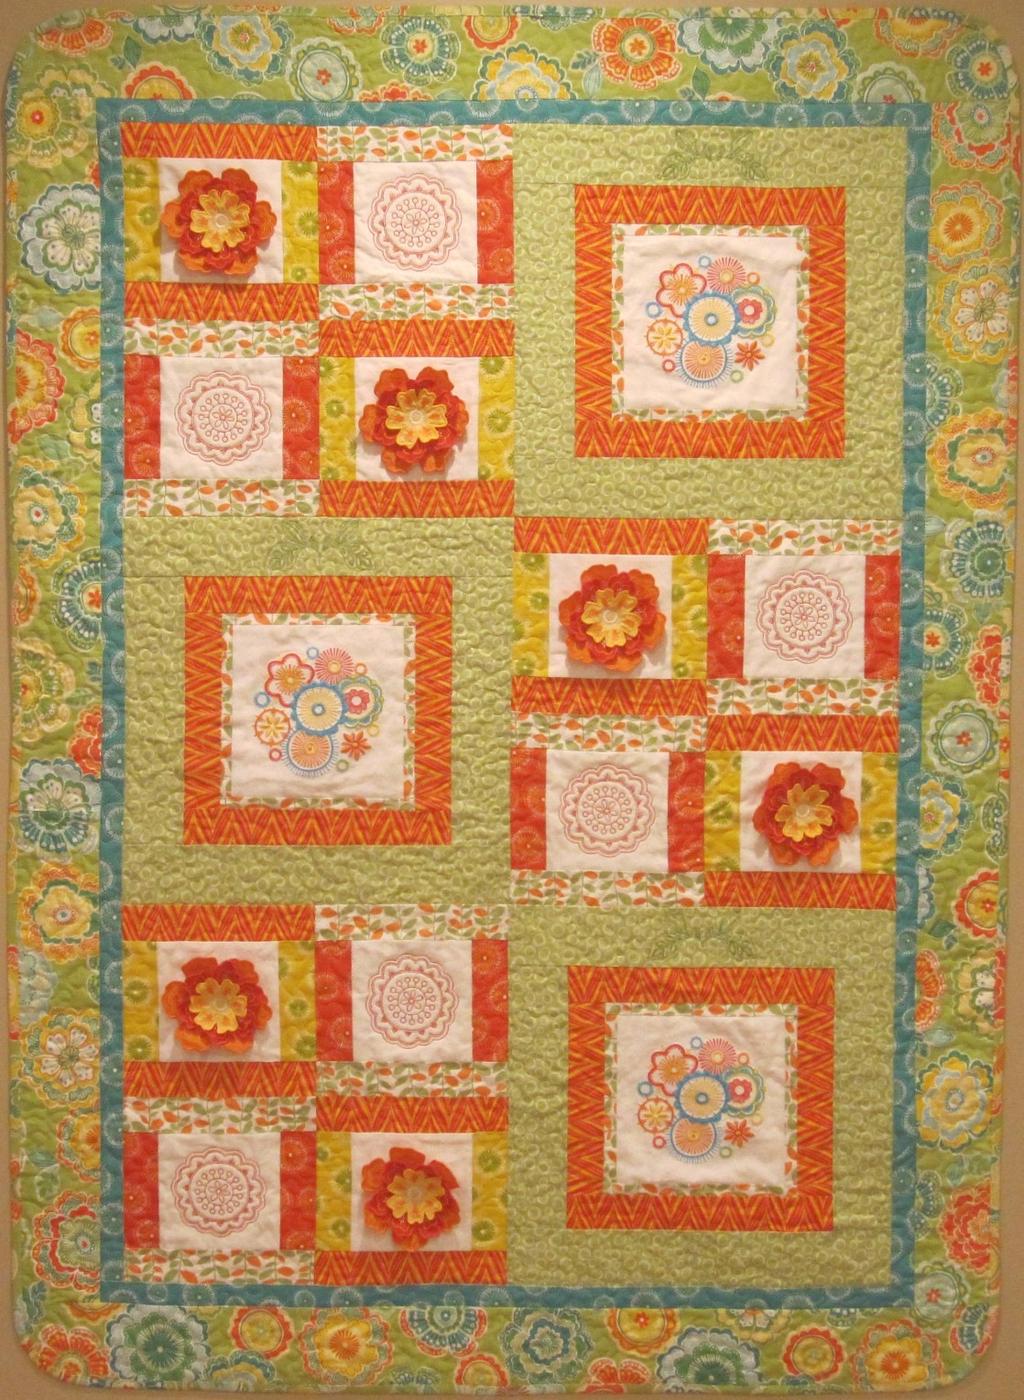 The colors of this quilt will keep you smiling long after the summer flowers are gone for the season. Flowers in Bloom!